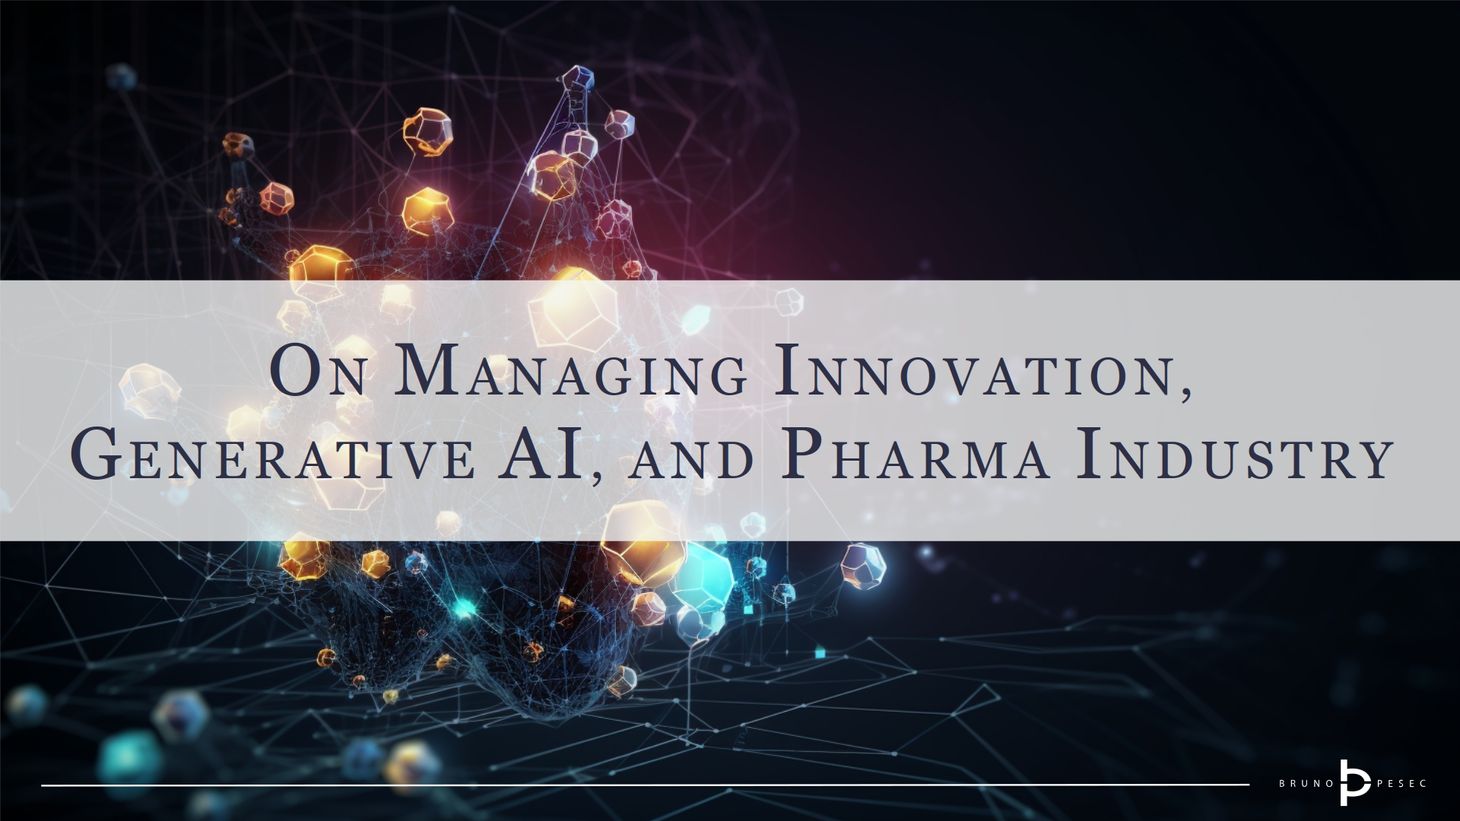 On managing innovation, generative AI, and pharma industry